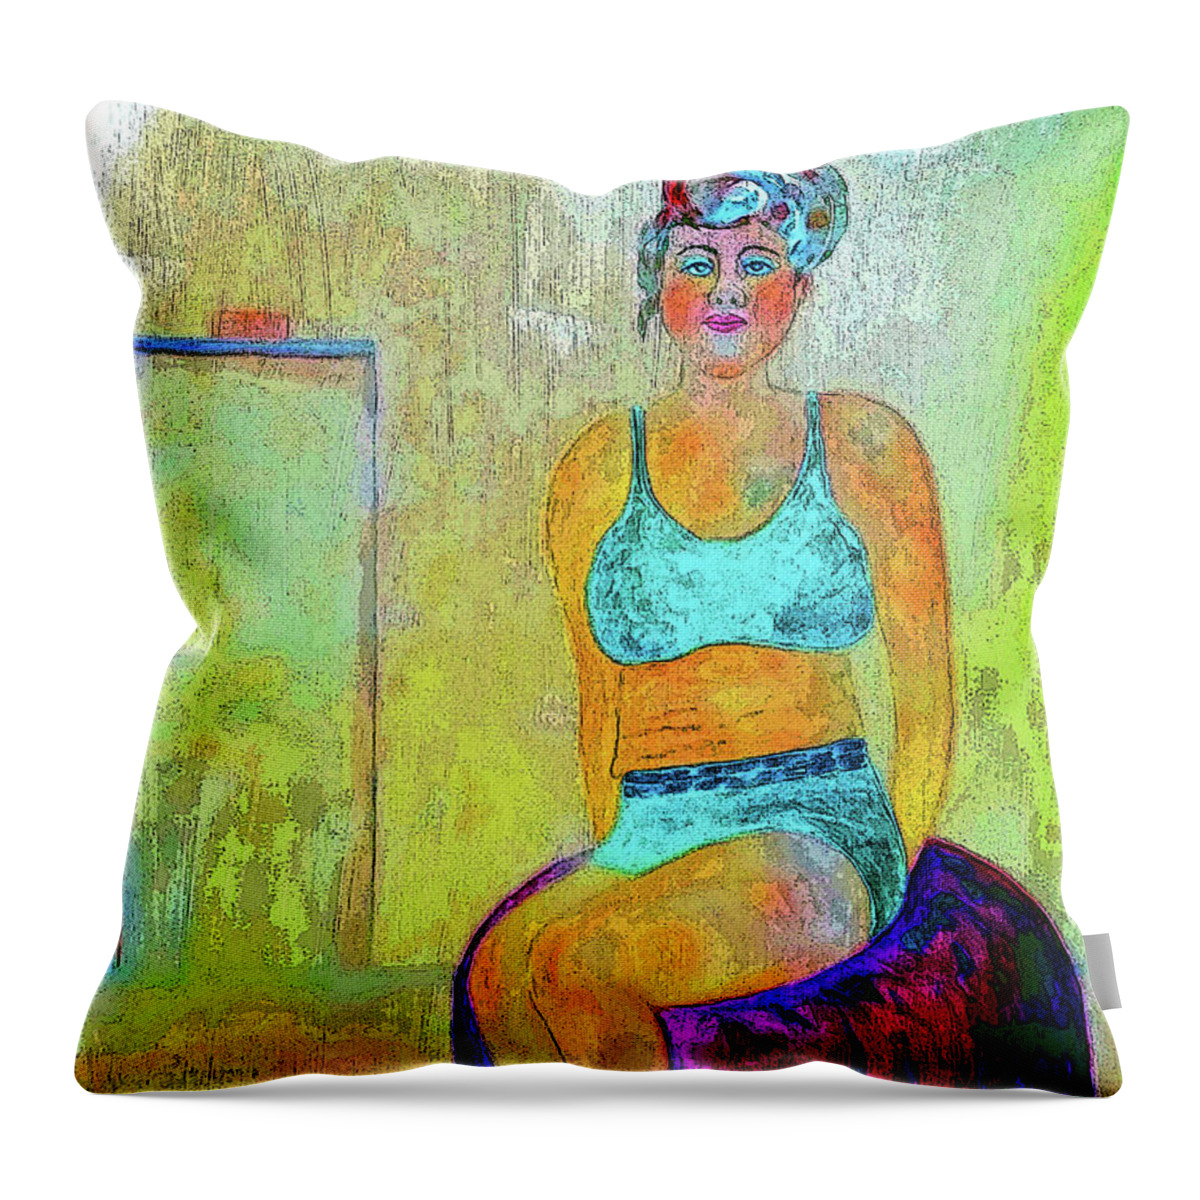 Ksg Throw Pillow featuring the painting Almost There by Kim Shuckhart Gunns